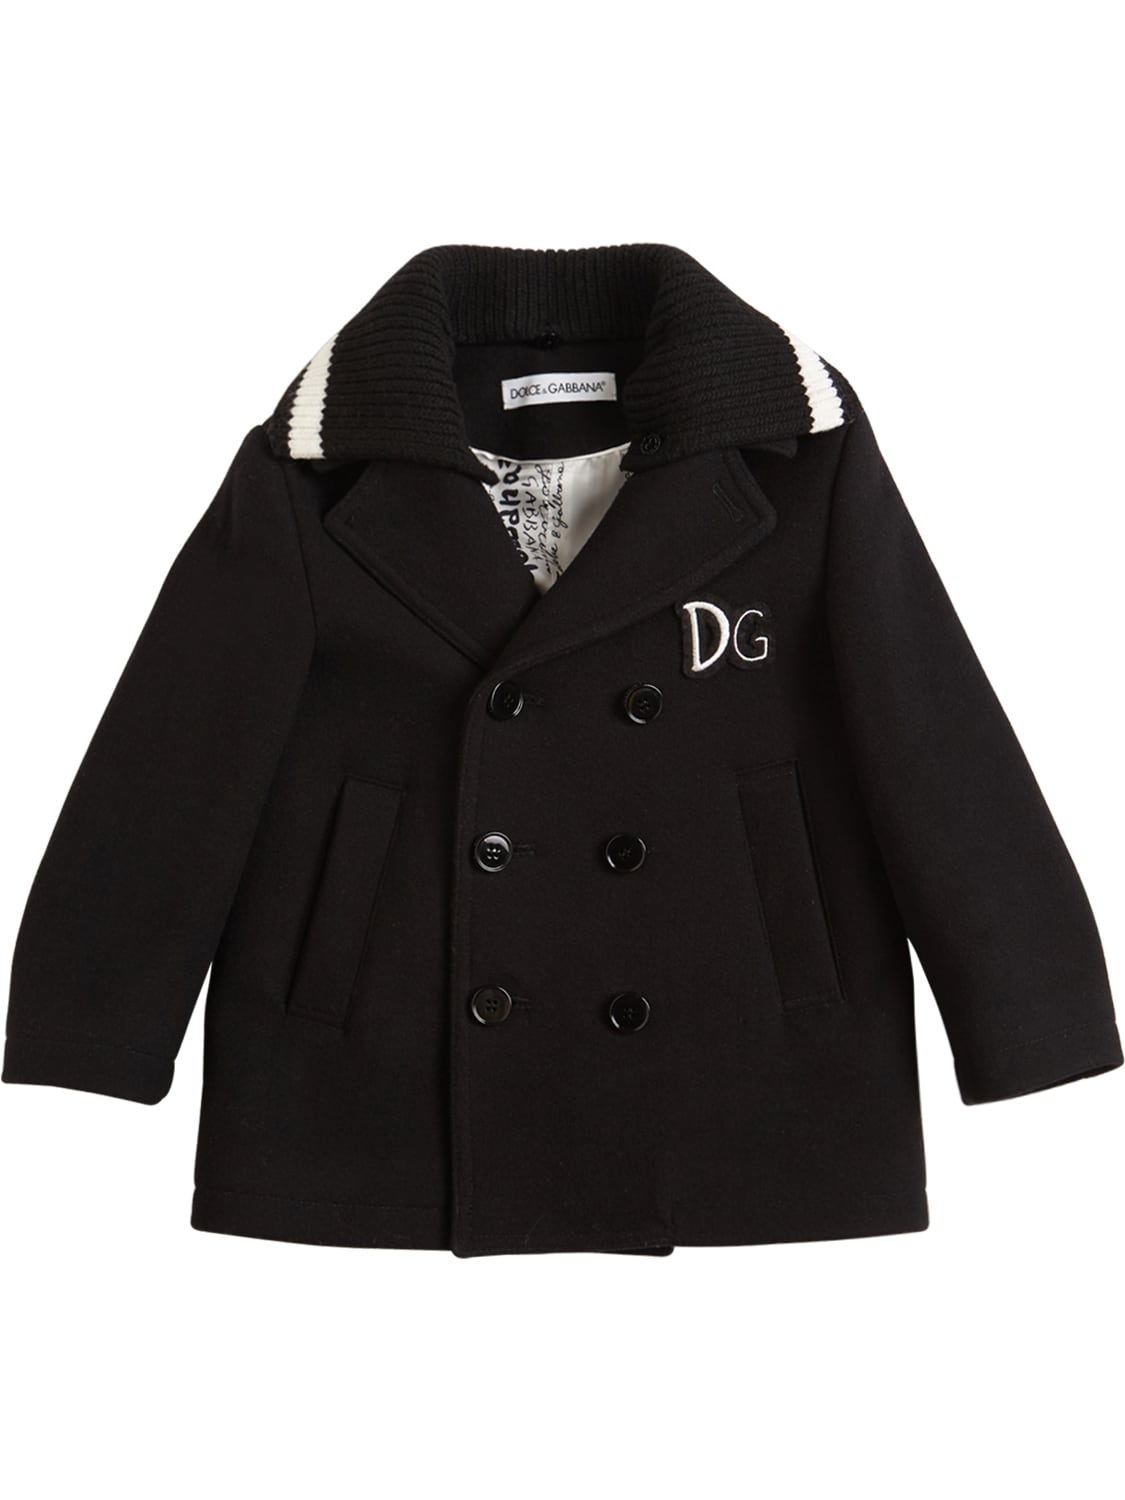 Dolce & Gabbana Kids' Broadcloth Pea Coat With Dg Patch In Black